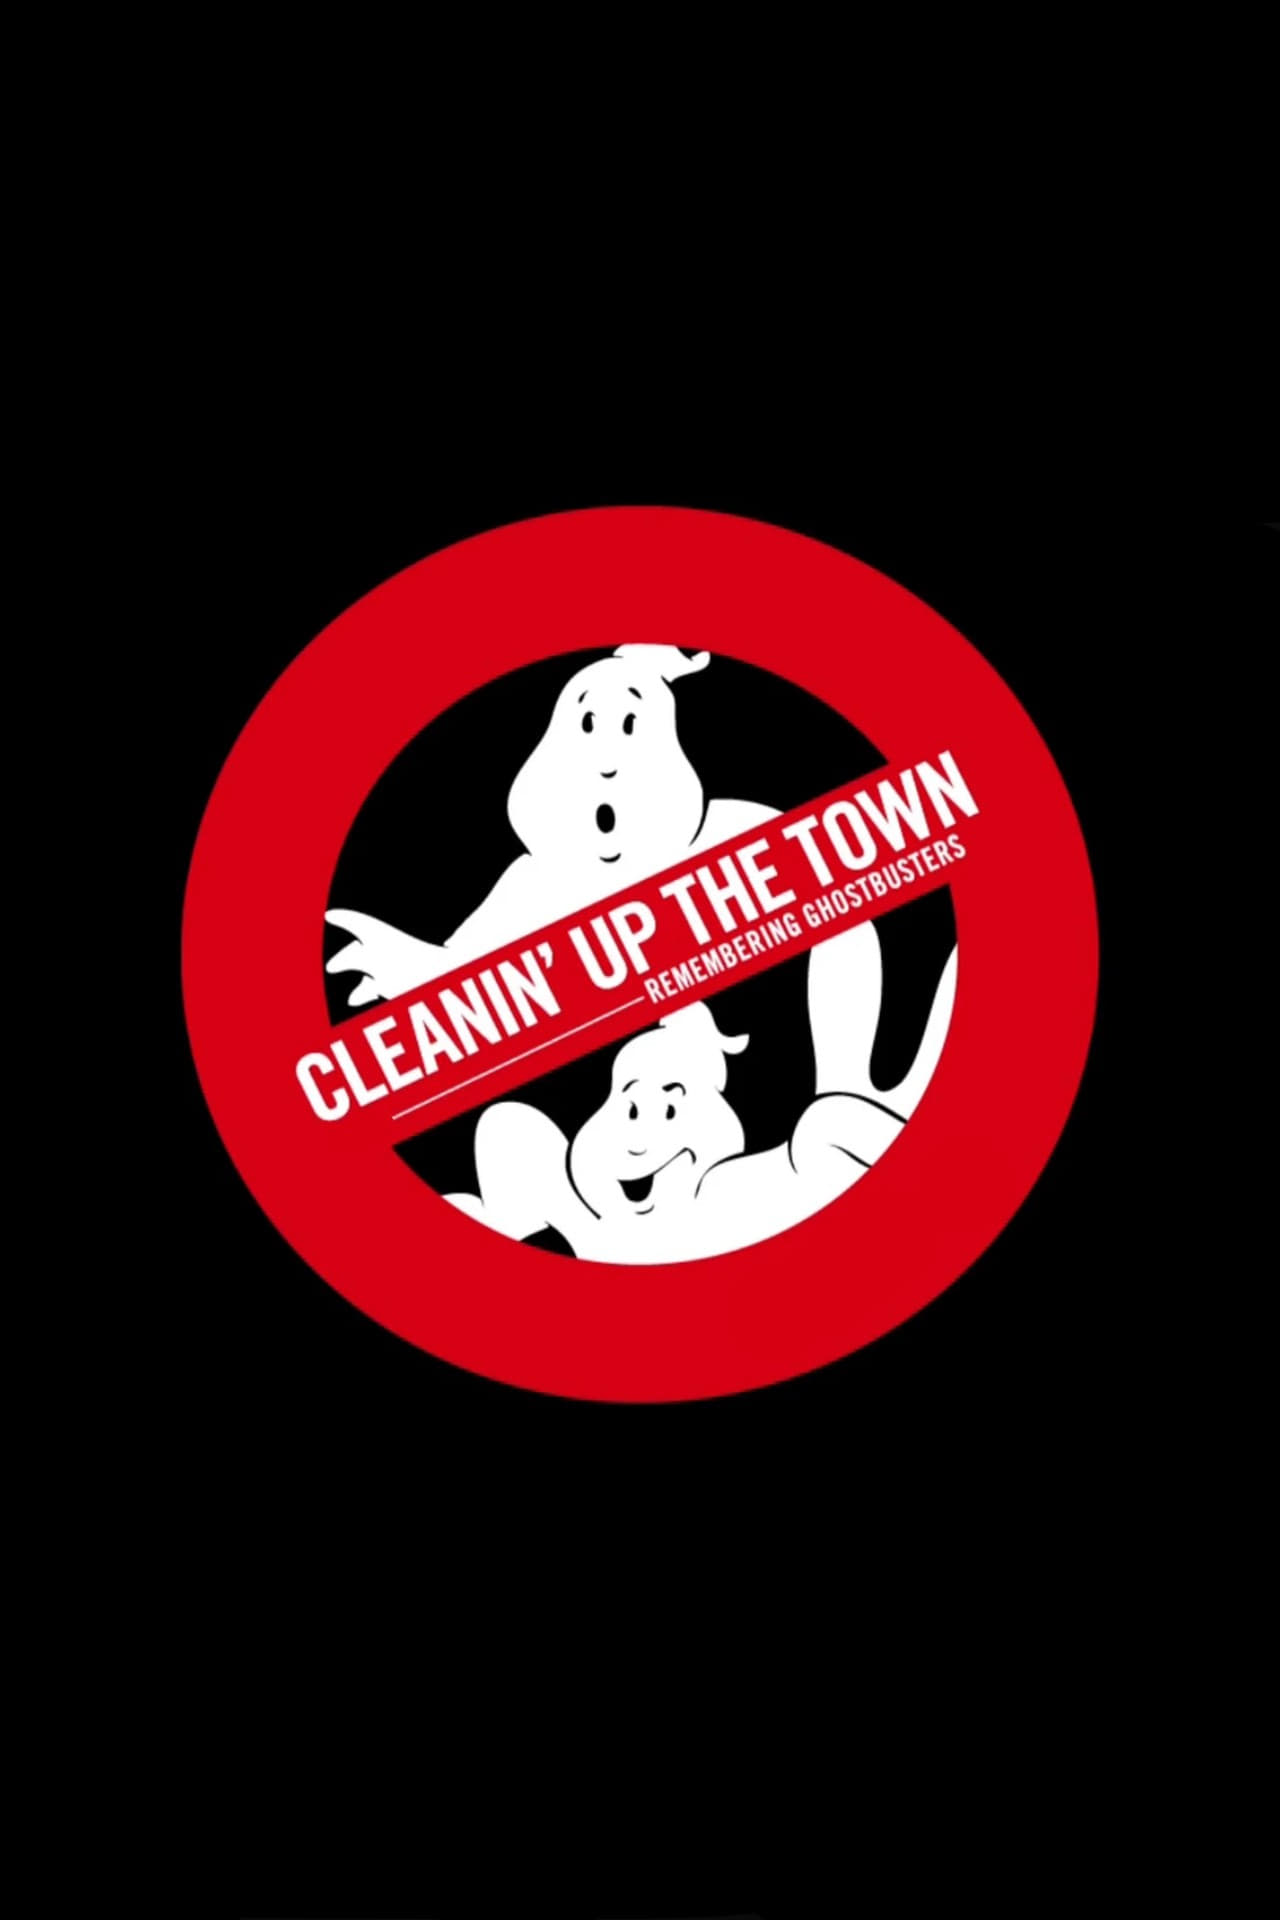 Cleanin' Up the Town: Remembering Ghostbusters on FREECABLE TV